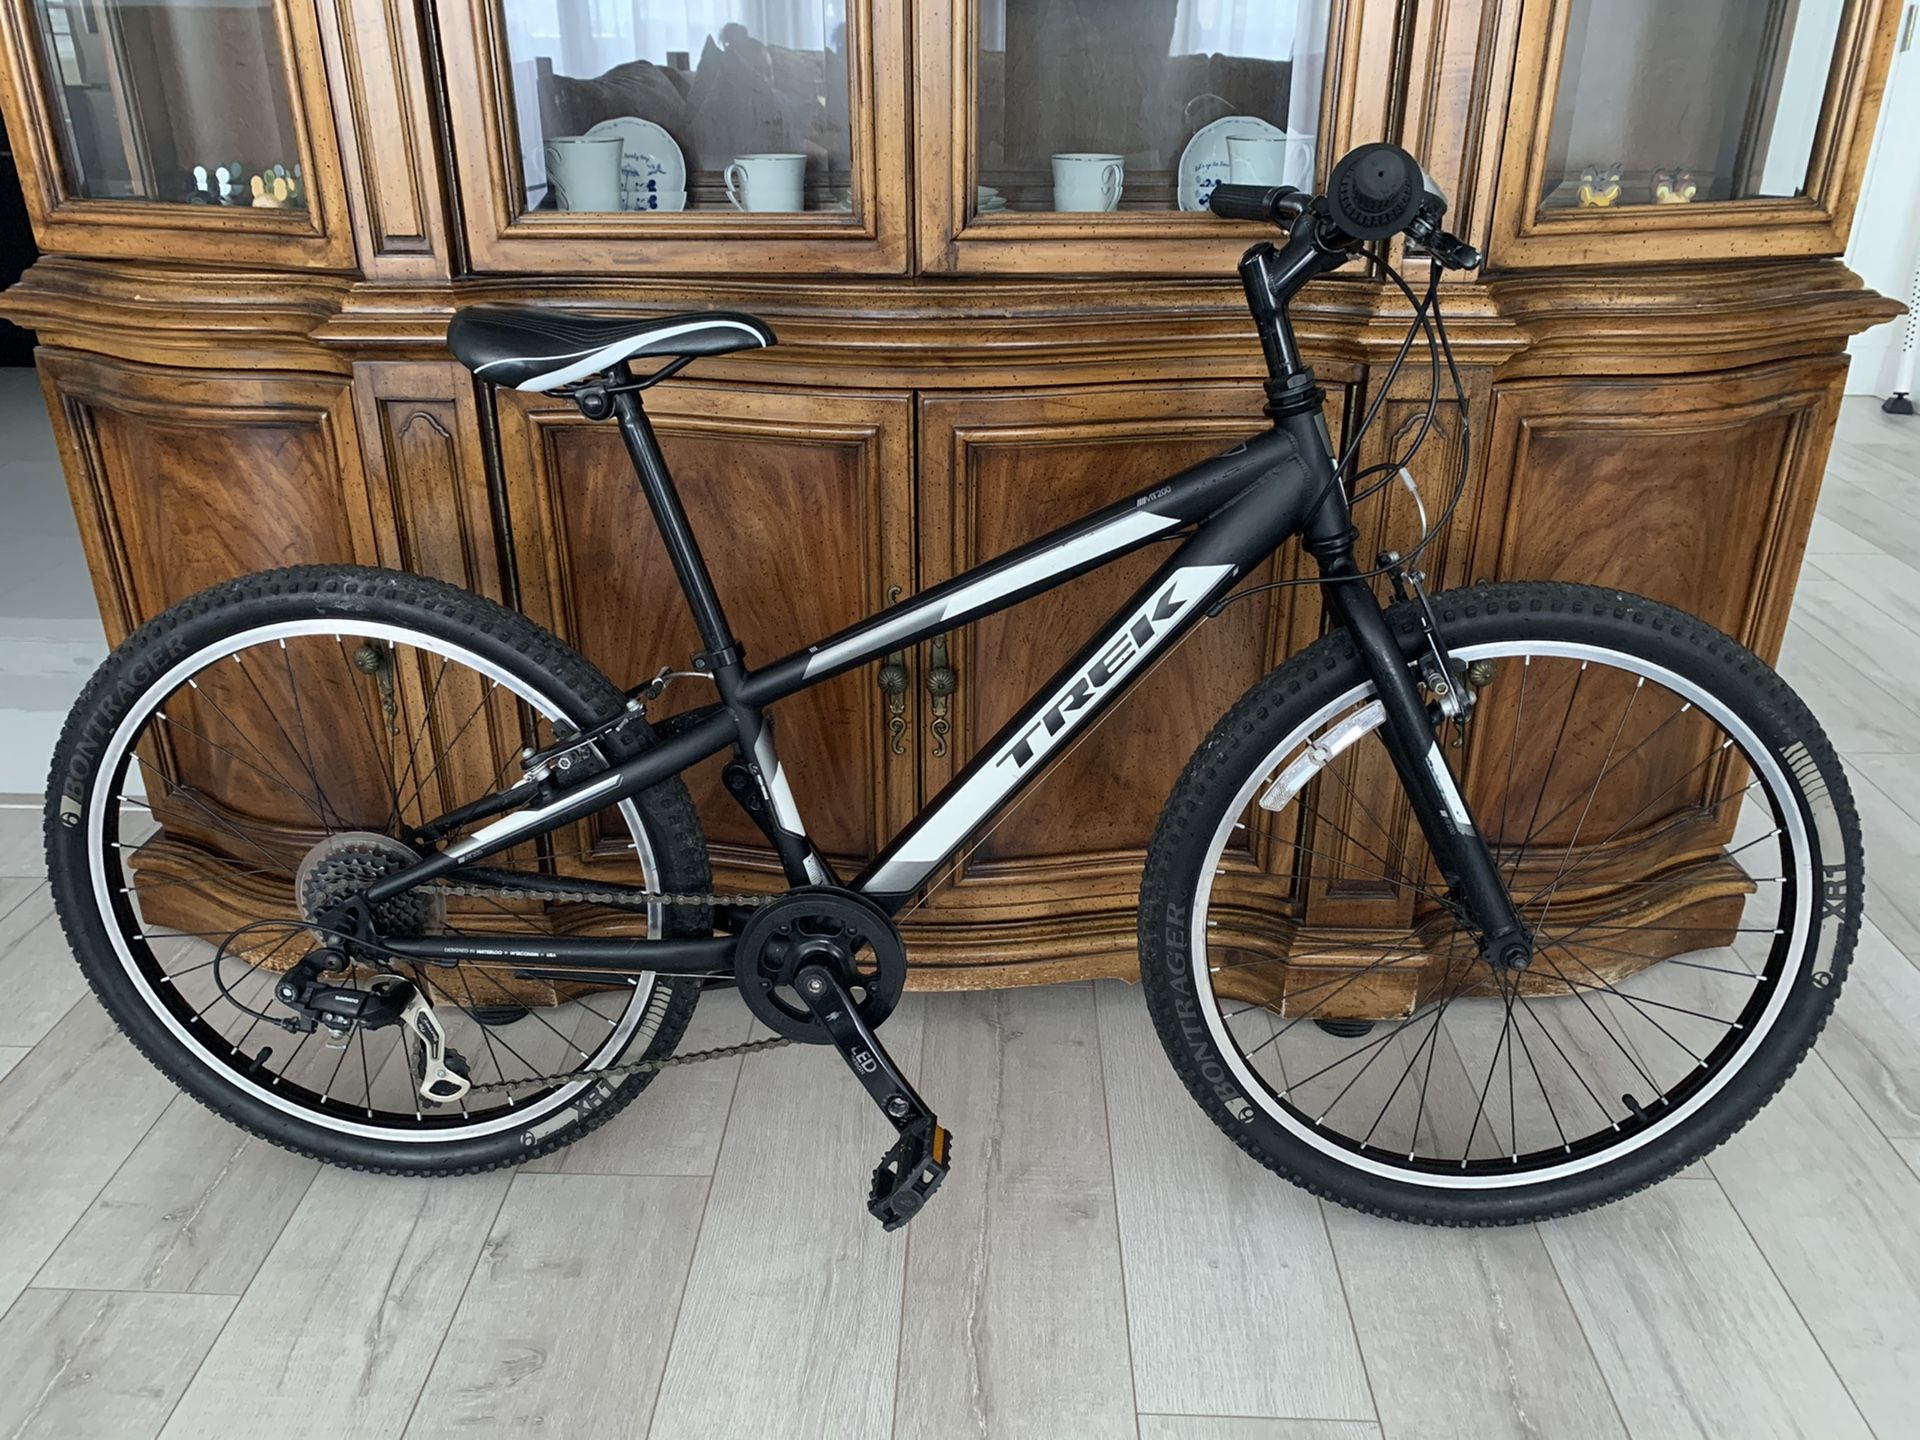 Trek MT200 - 7 Speed 24” Tire Mountain Bike Bicycle - for Kids or Small Woman